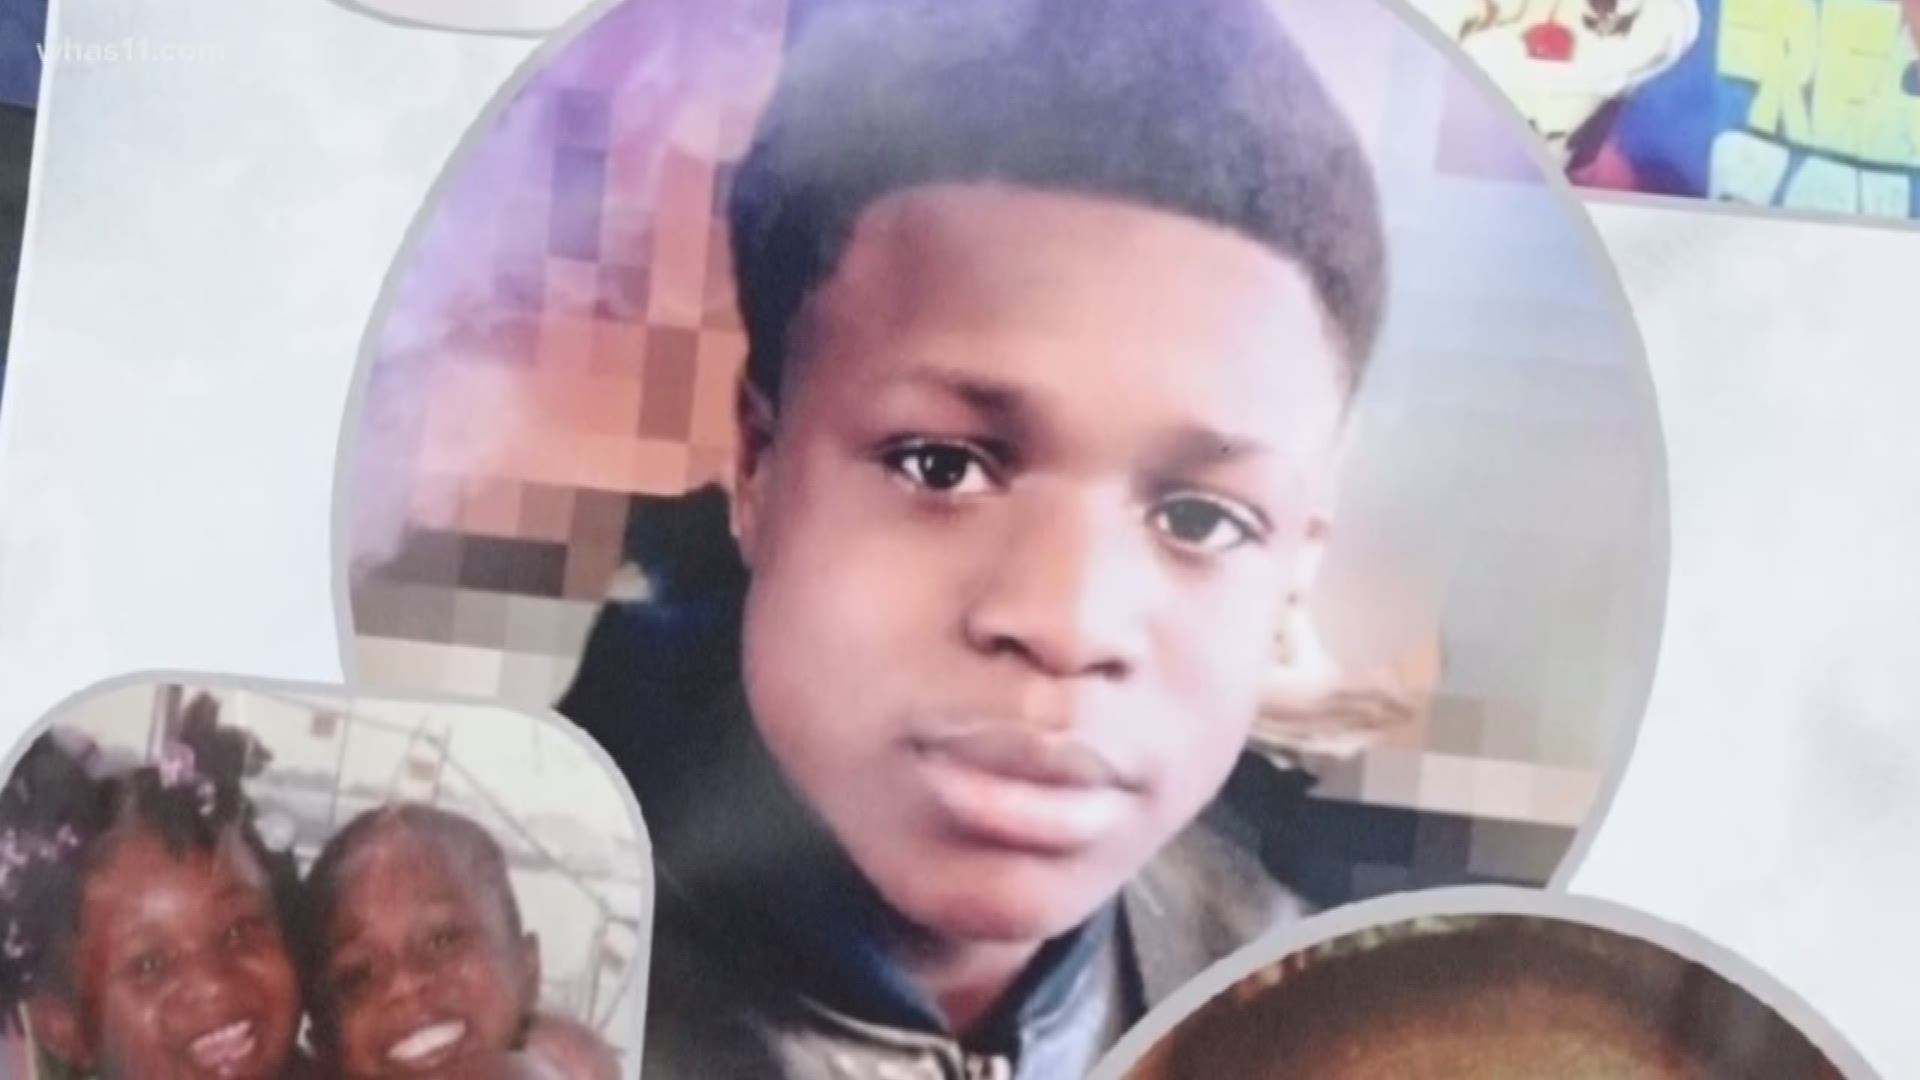 The mother and cousin of 17-year-old Martez Wade are asking for any clues that could lead to an arrest.